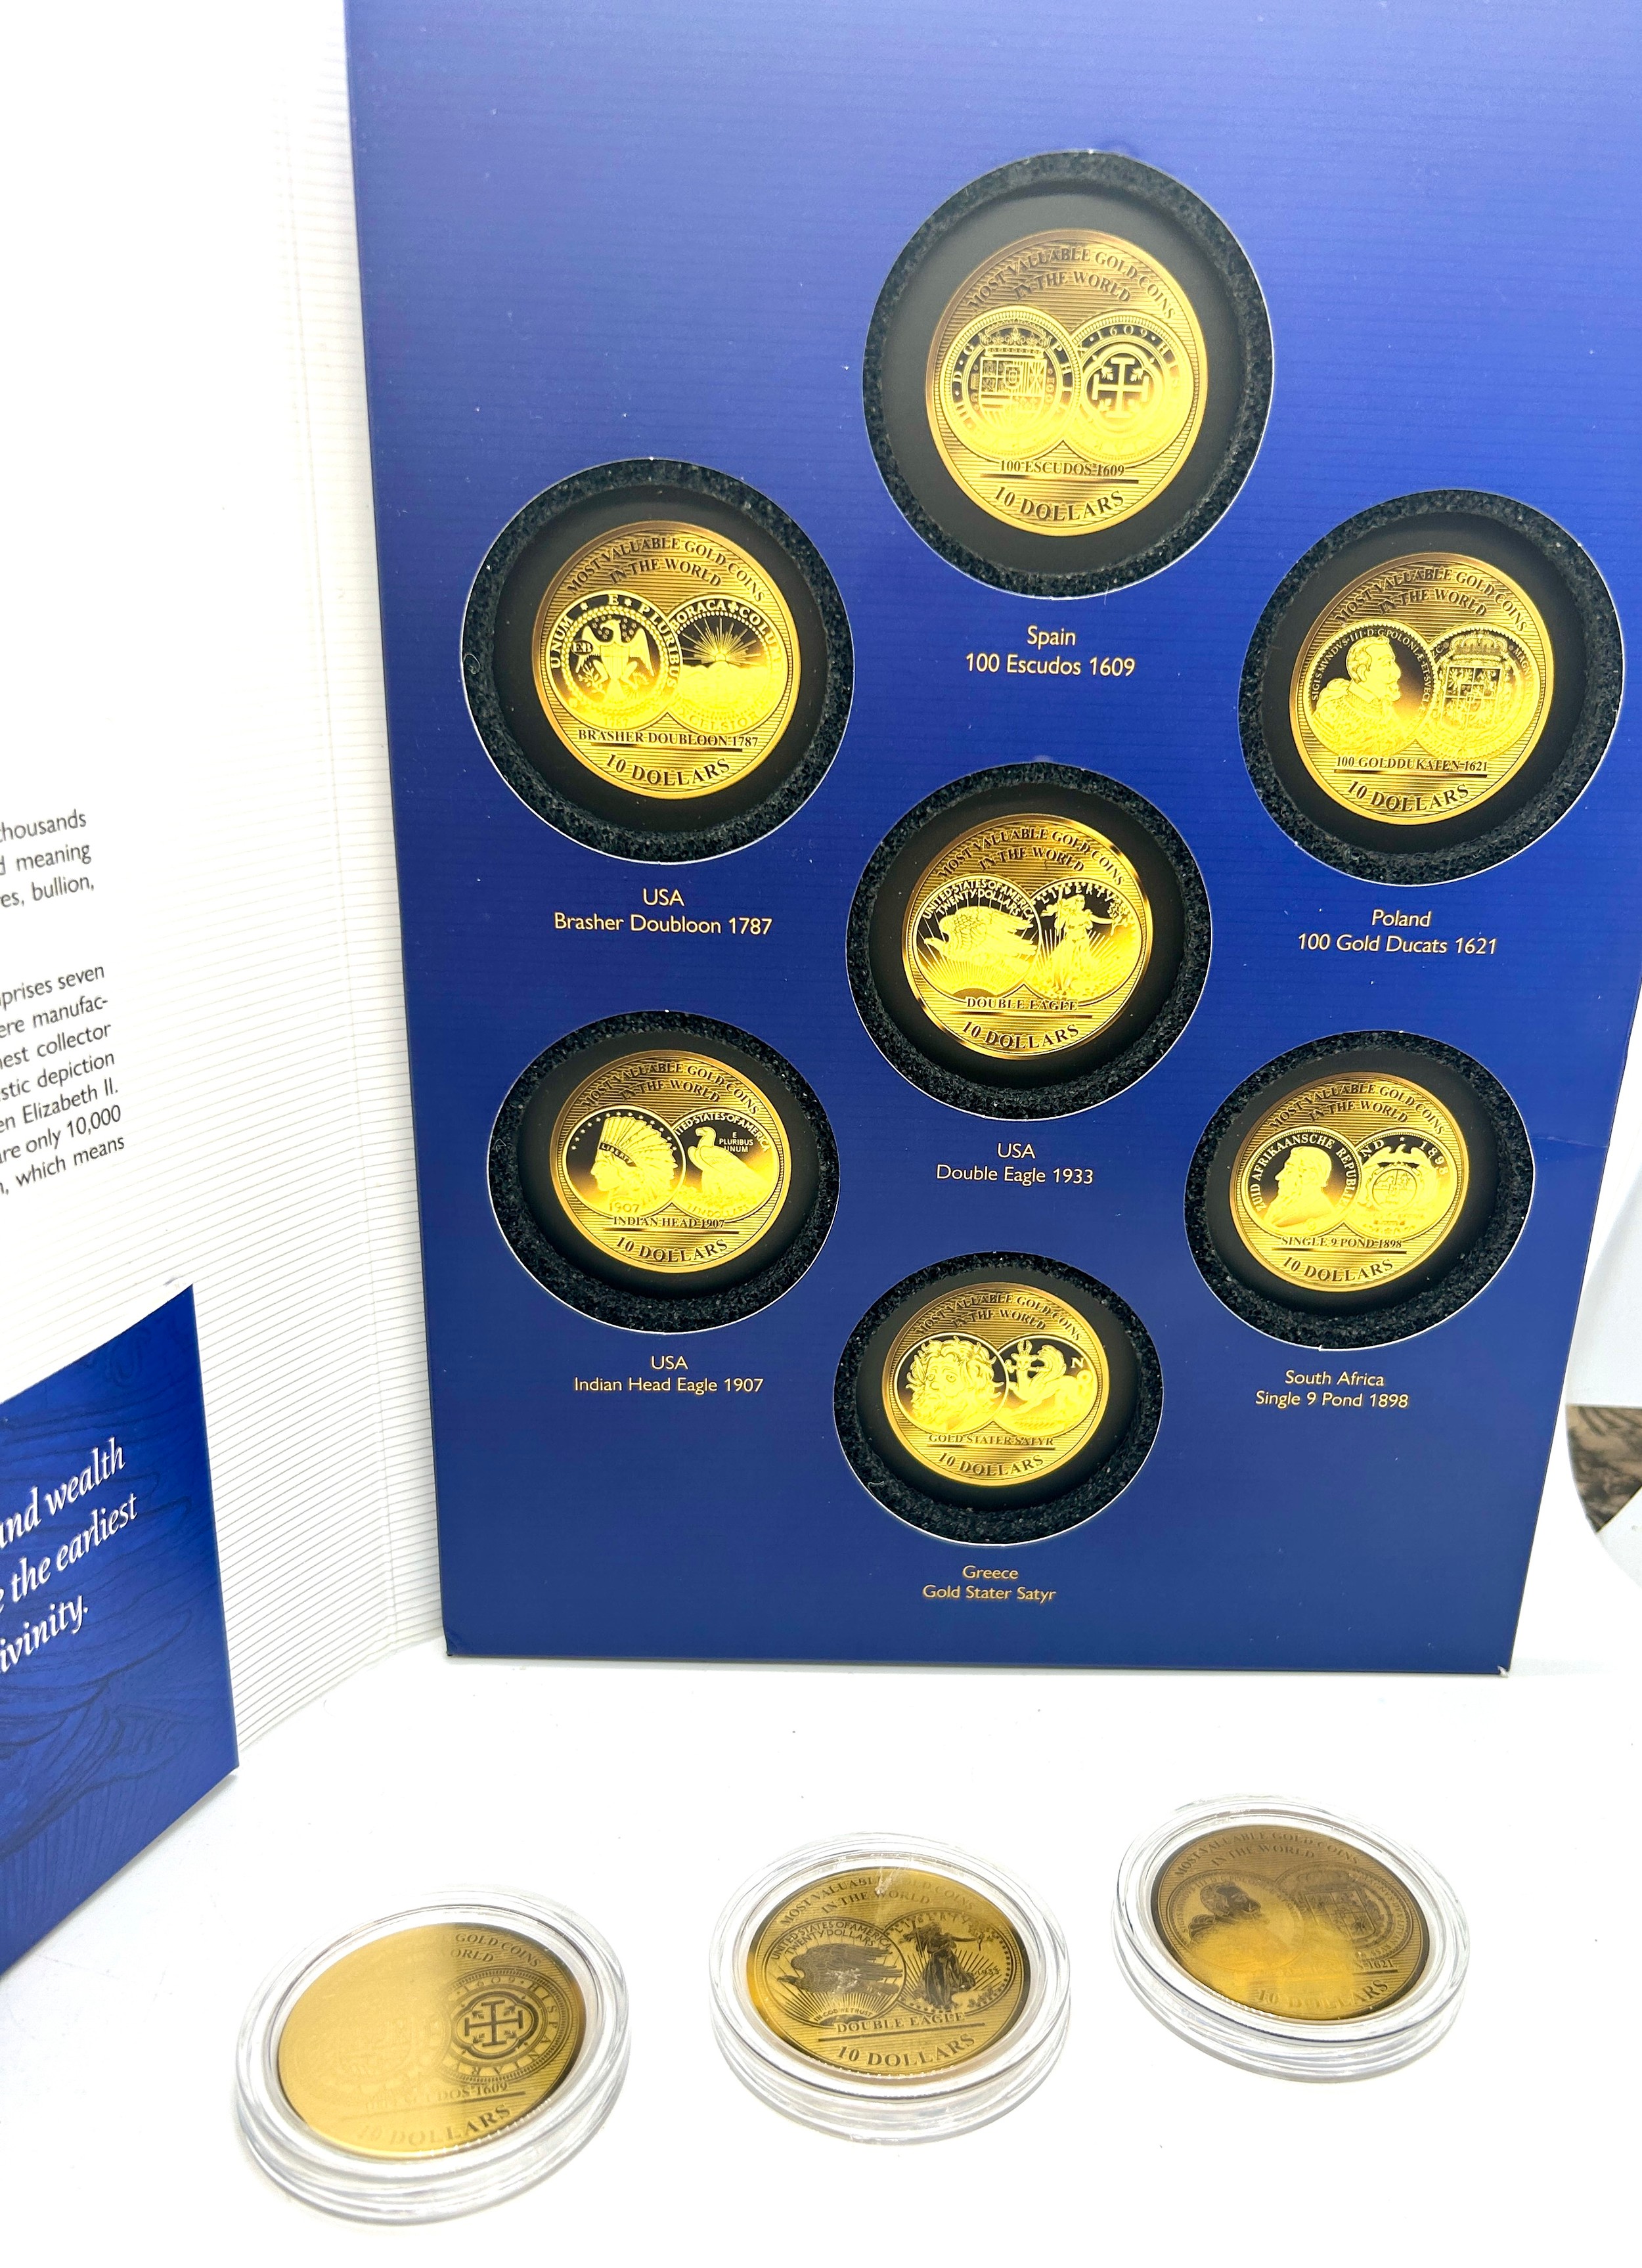 3 Solomon Islands, gold plated $10 coins by the worlds most valuable gold coins, to include USA - Image 2 of 3